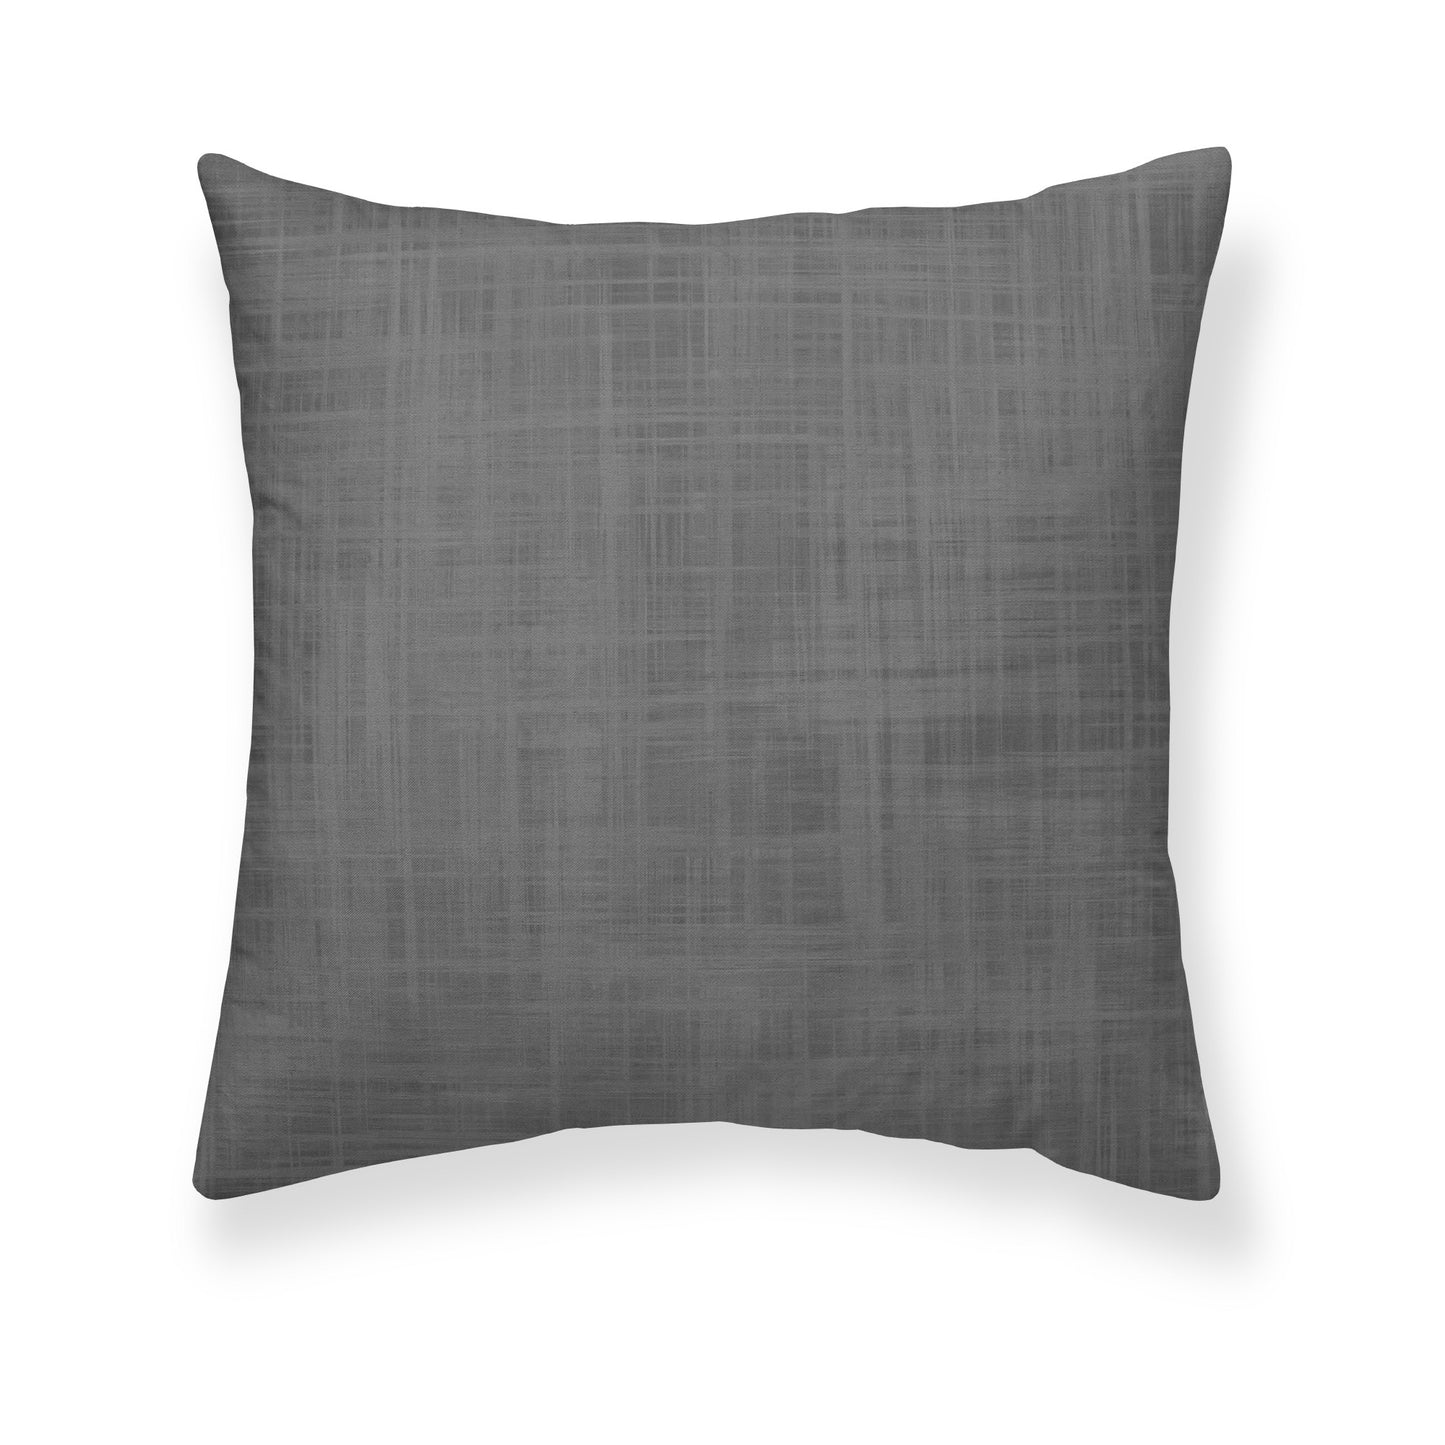 Indoor and outdoor stain-resistant cushion with stain-resistant filling 0120-42 50x50 cm